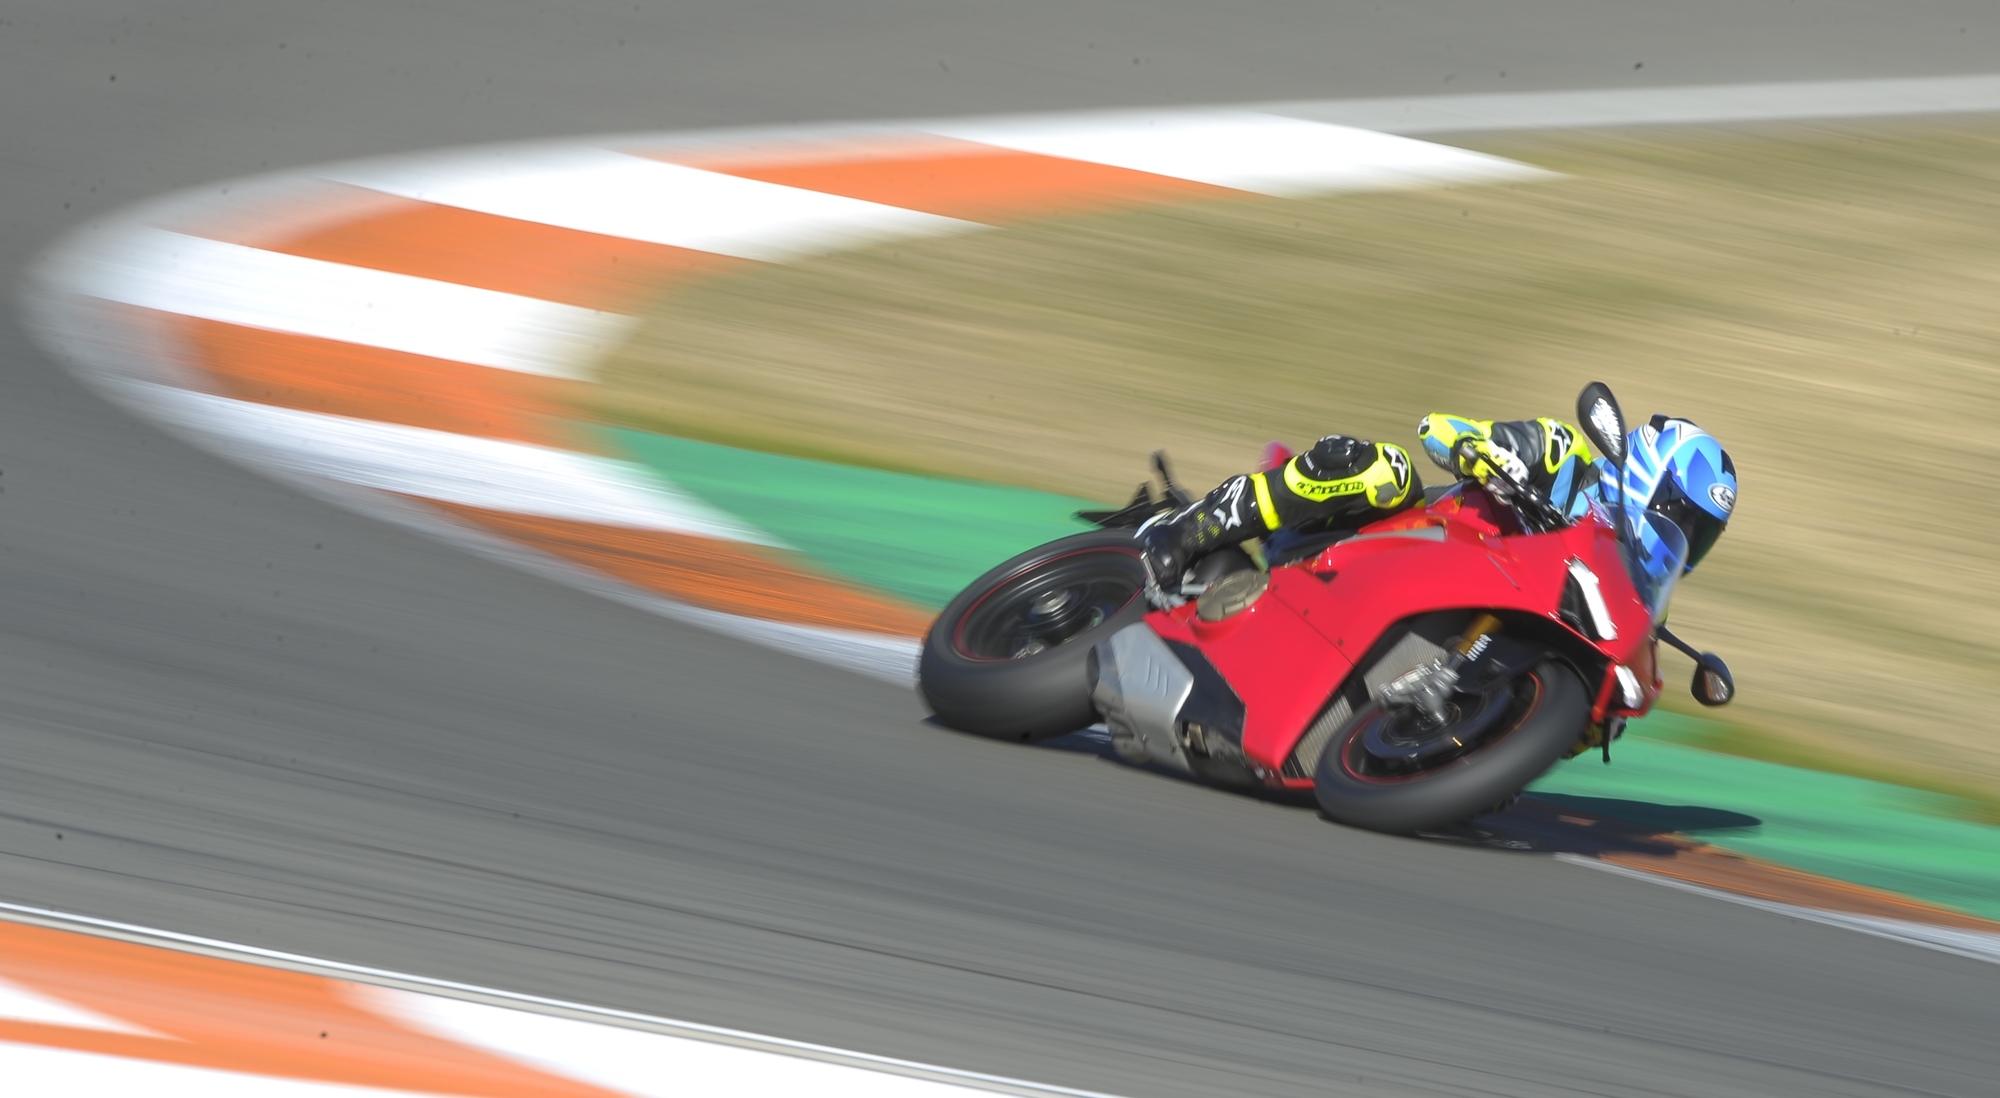 The 2018 Panigale V4 S Is The Fastest Ducati Superbike We've Ever